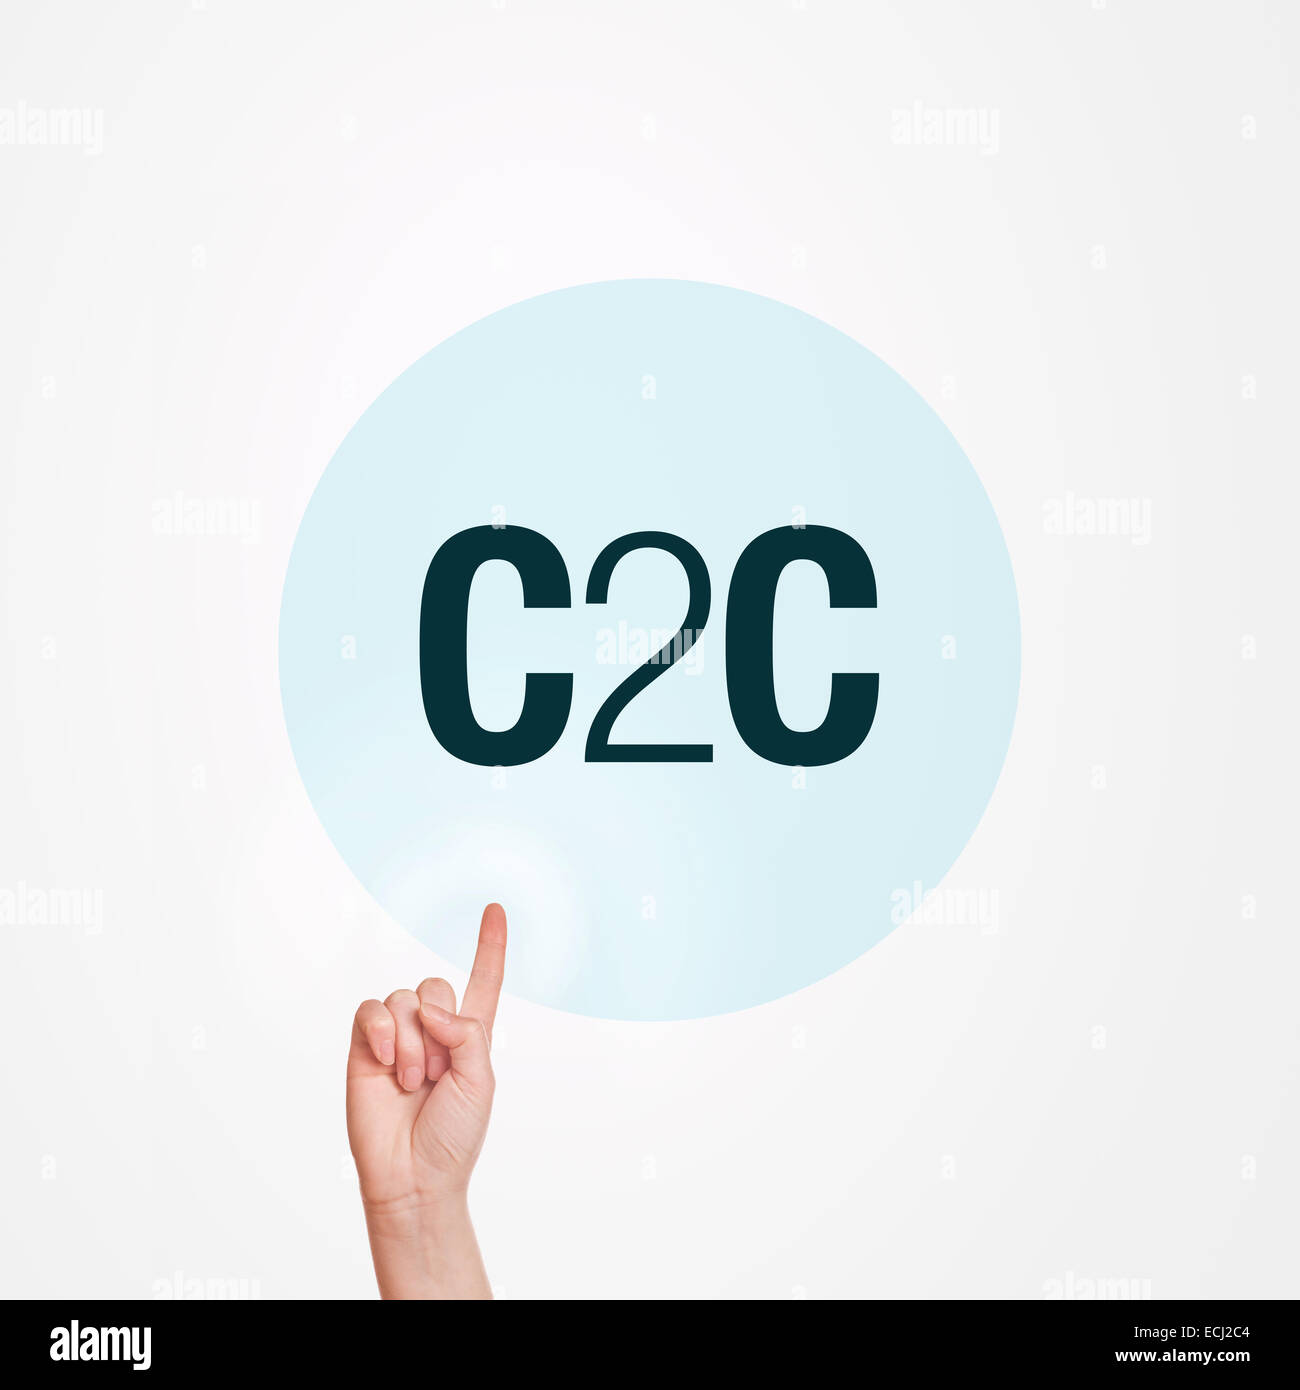 C2C, Consumer to consumer conceptual image with hand pushing the button on virtual touchscreen. Stock Photo